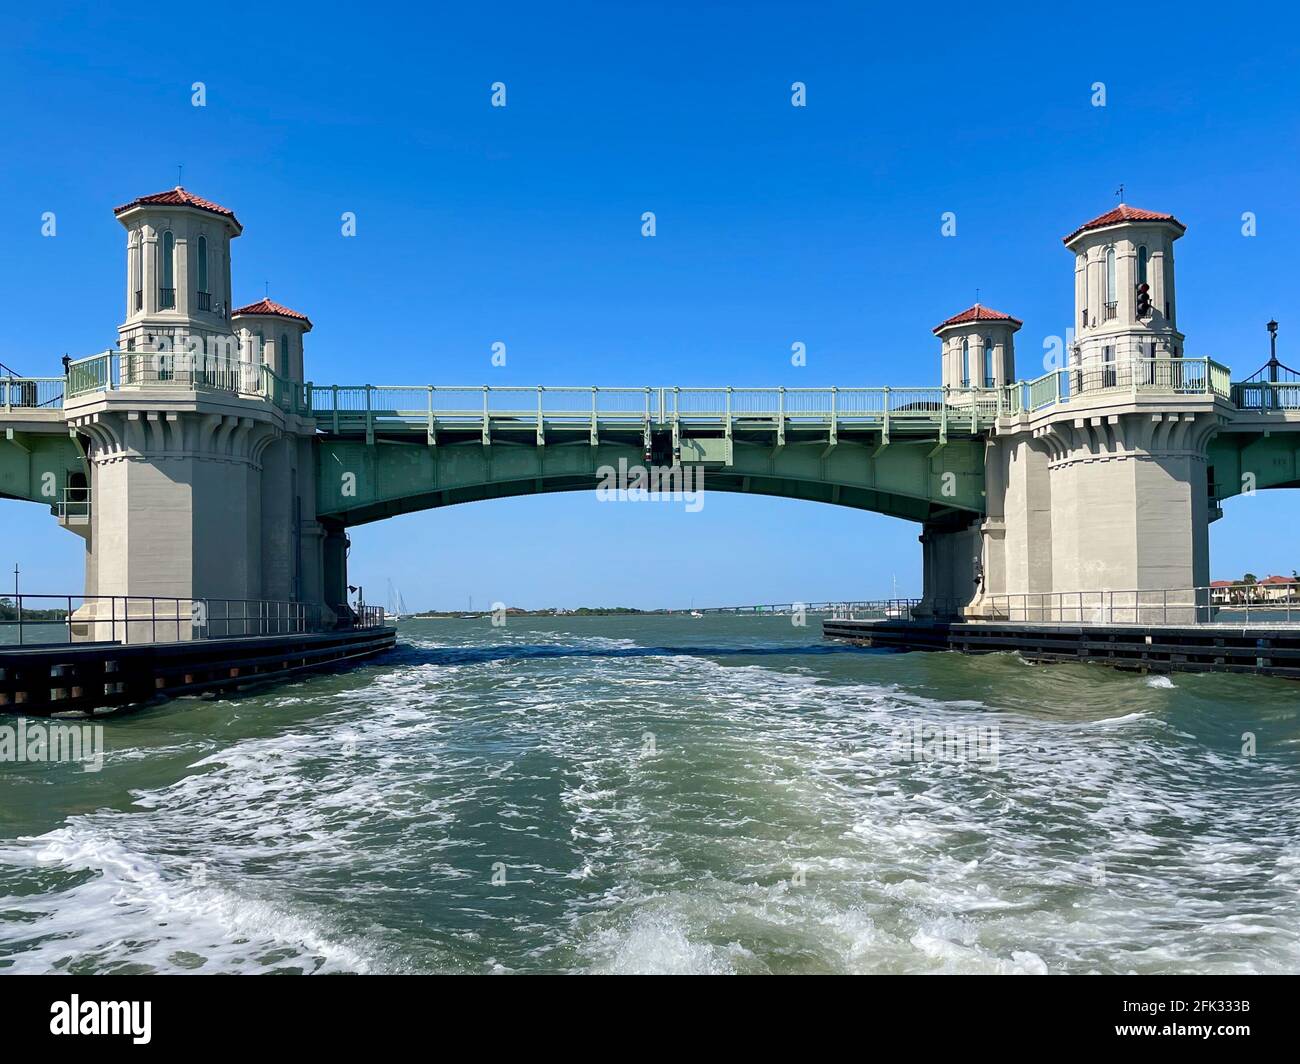 Saint Augustine, Florida, USA - April 3, 2021: The historic 'Bridge of Lions' is a double-leaf, bascule bridge that spans the Intracoastal Waterway. Stock Photo